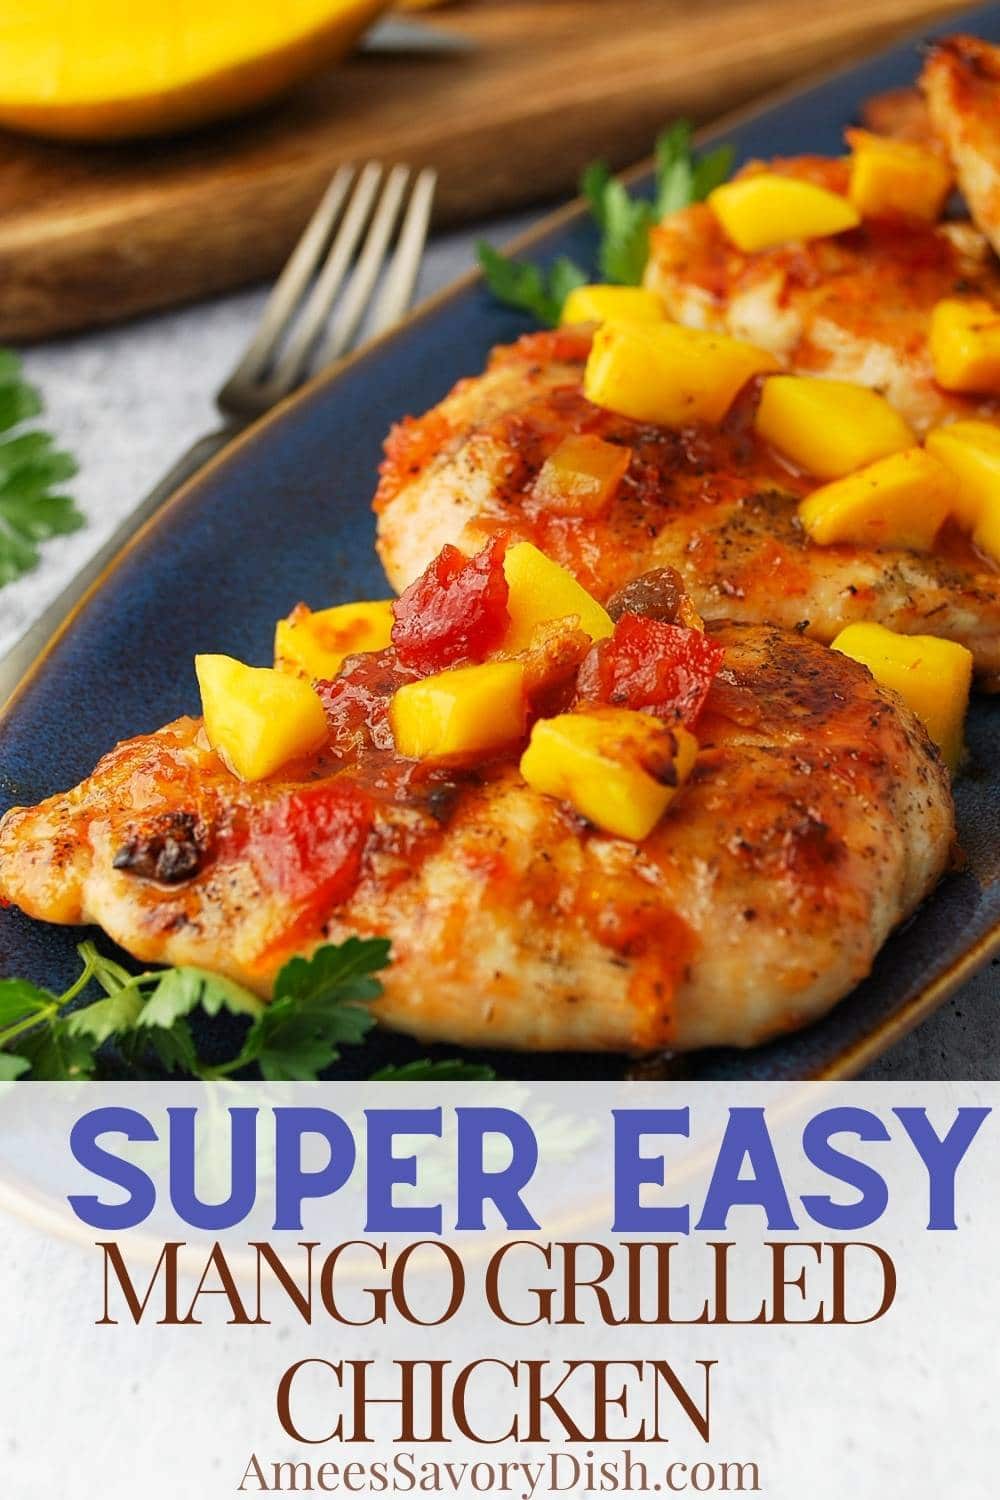 This Mango Grilled Chicken showcases juicy chicken breast glazed in a mango fruit sauce. You'll love this quick, easy, and gluten-free recipe! via @Ameessavorydish